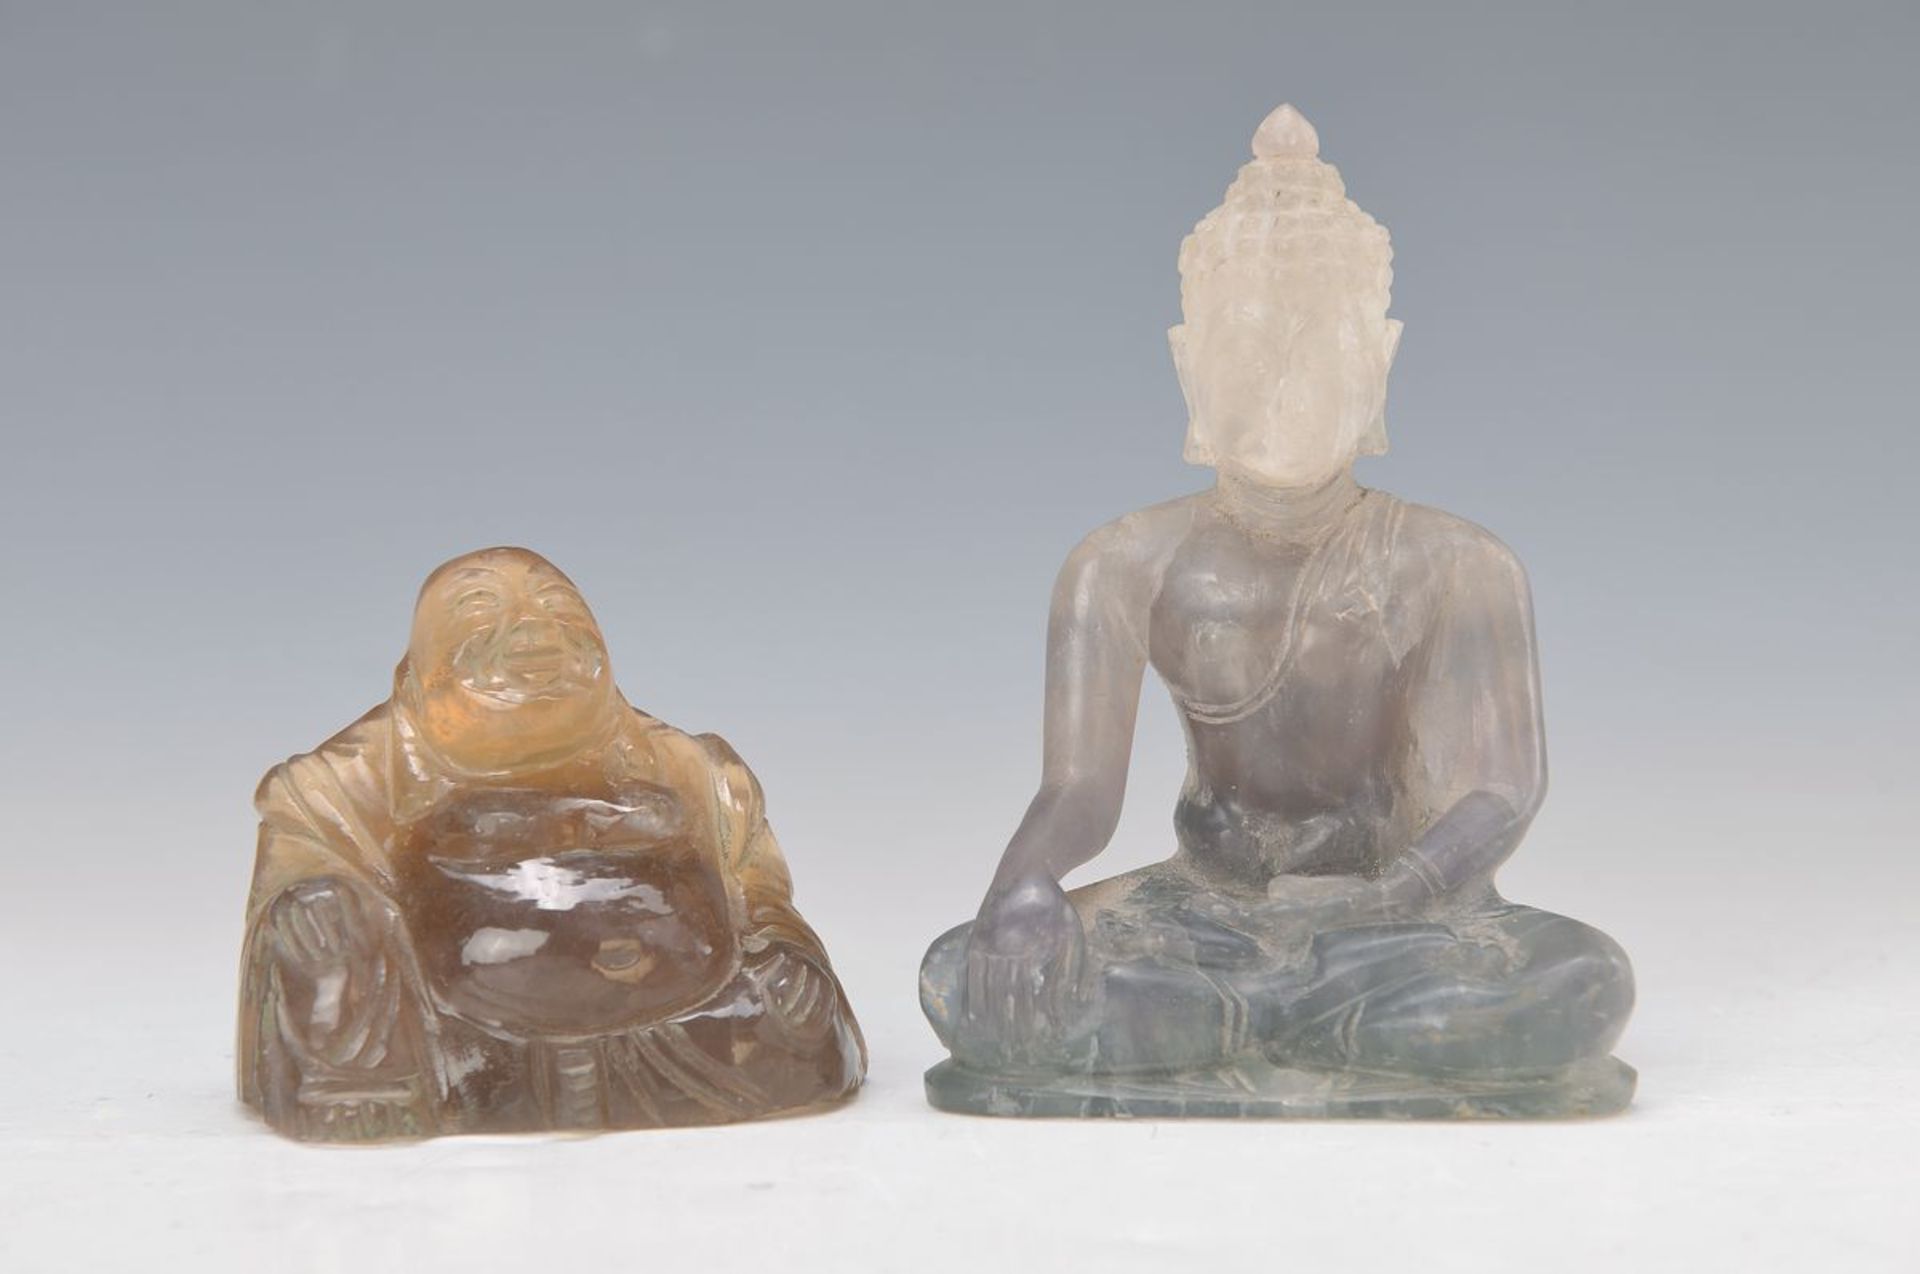 two Buddha sculptures, China, rock crystal andquartz crystal, H. approx. 7/11.5 cm